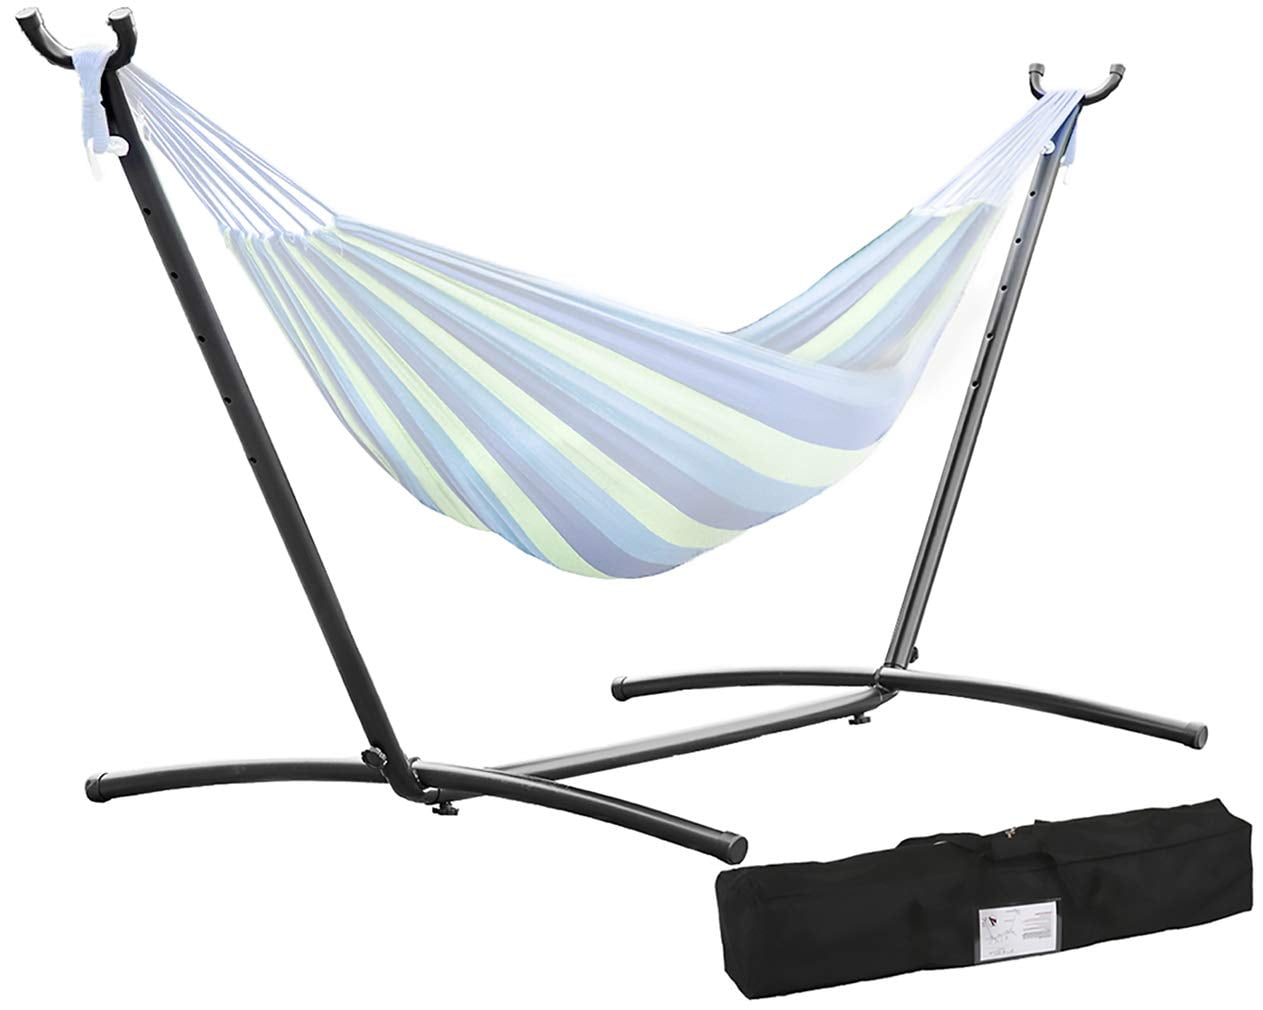 Steel Swing Hammock Stand Space Saving Outdoor Patio Portable w/ Carrying Case 